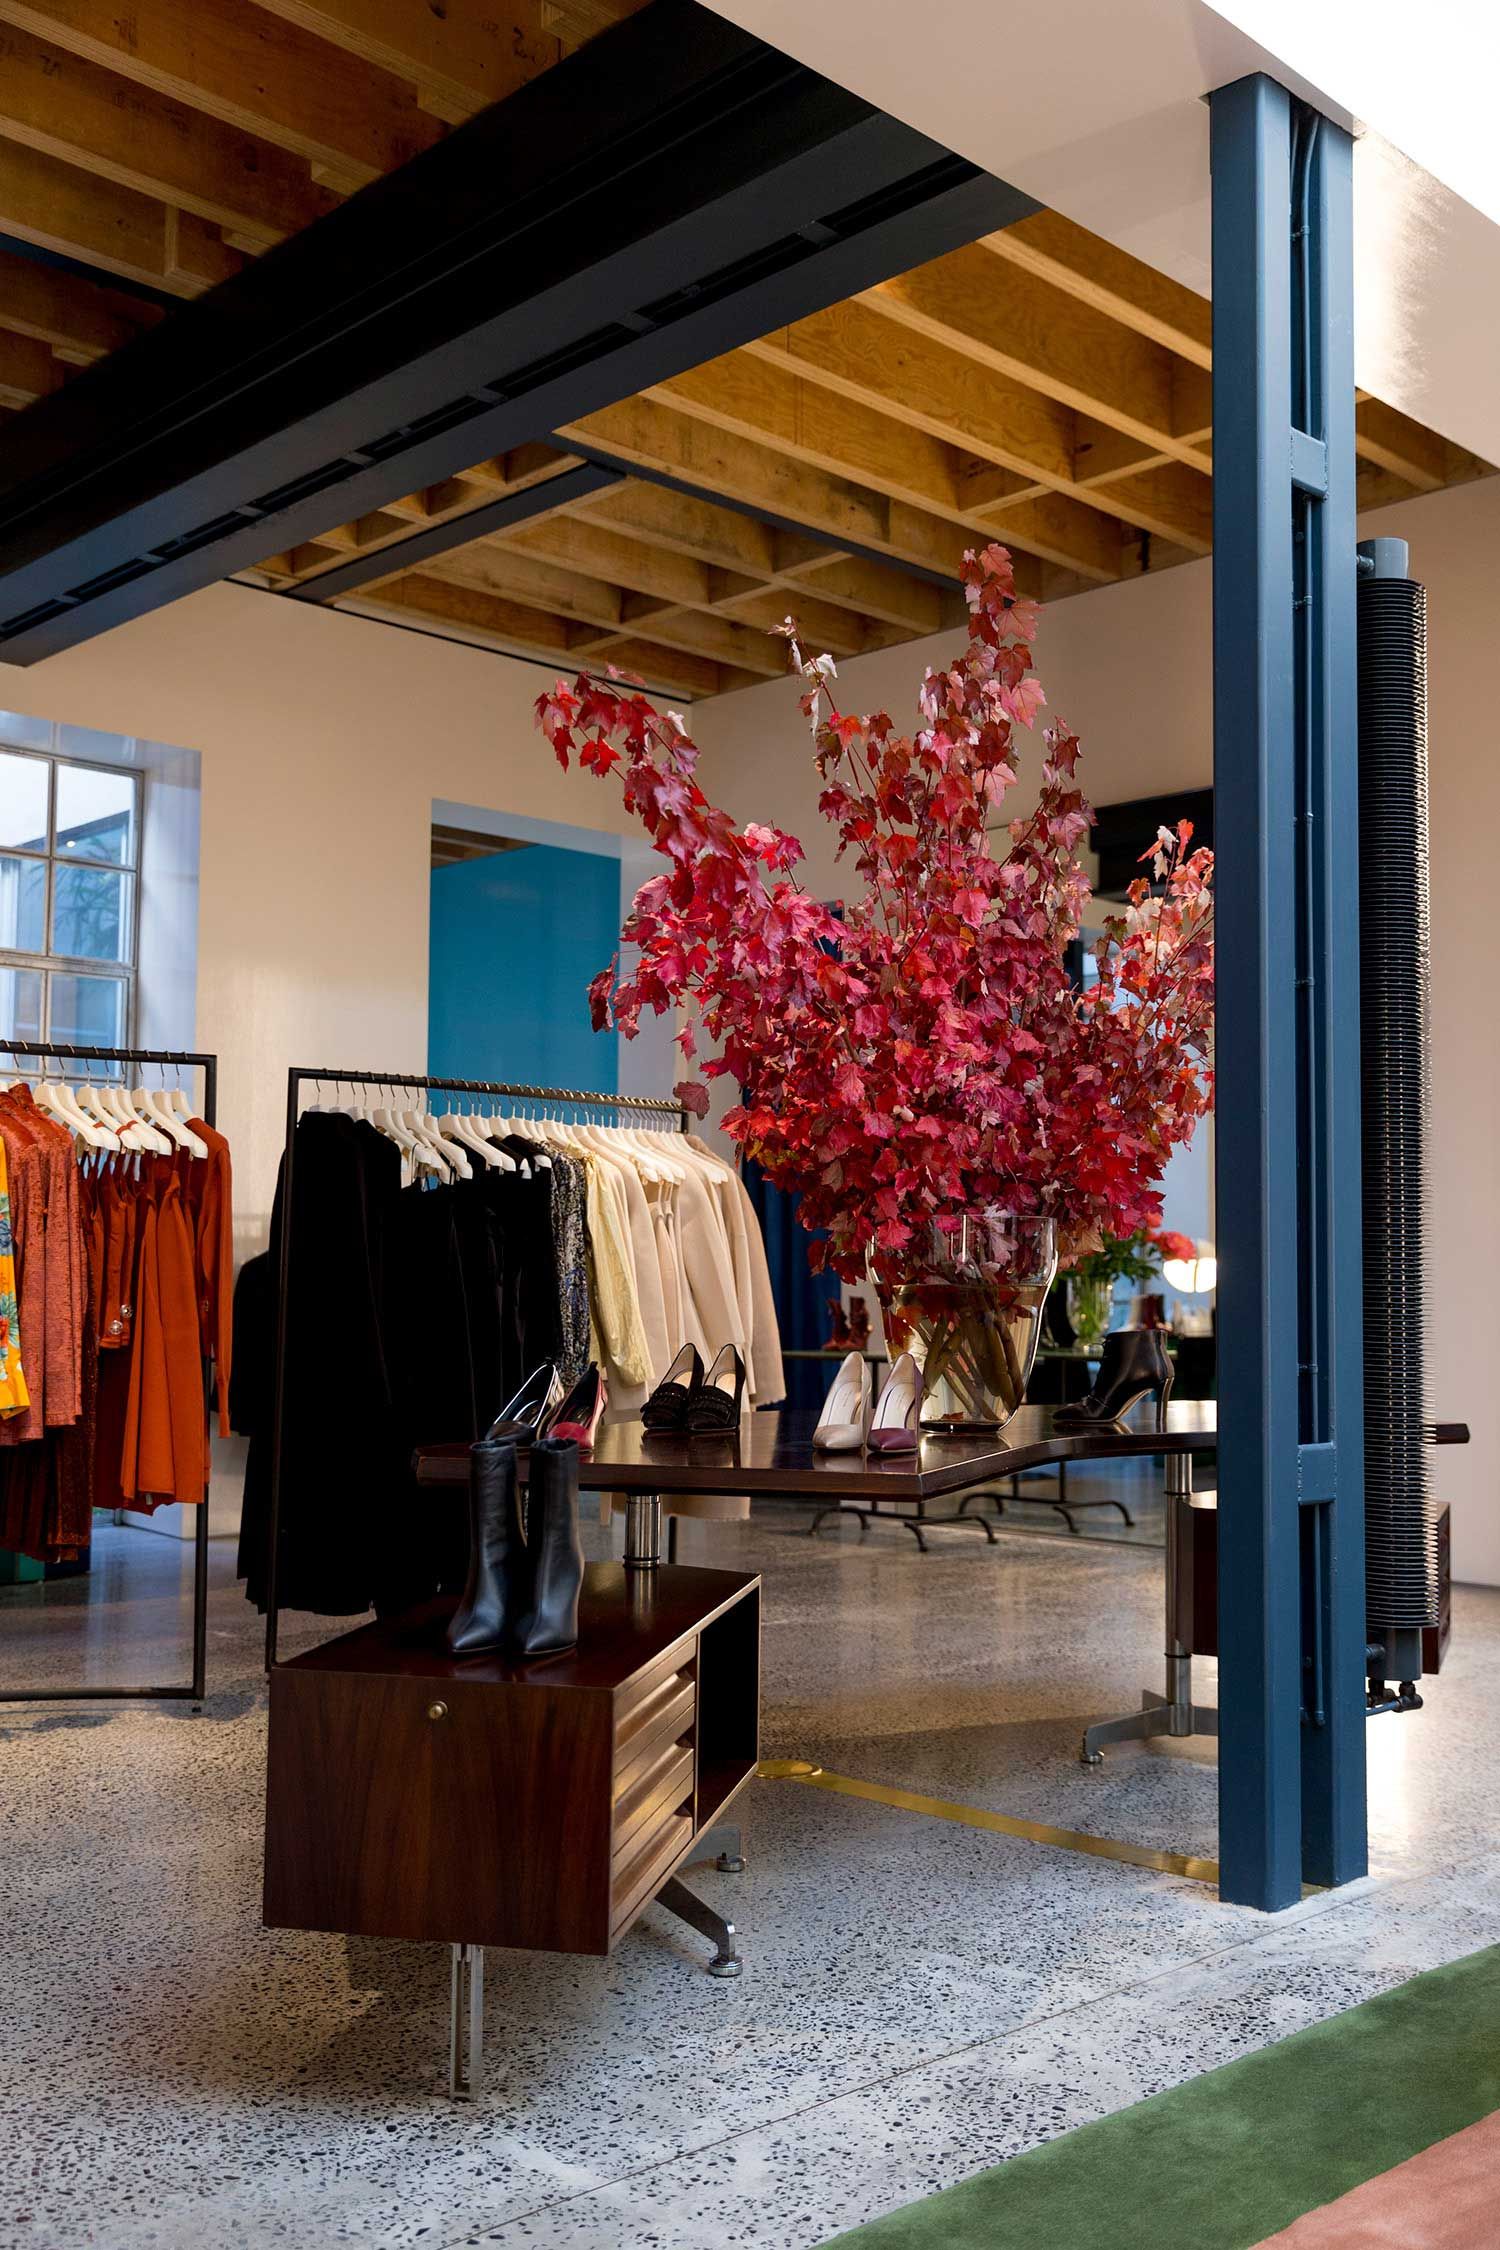 Store display with red leaves floral arrangement, shoes on a desk, and racks of clothing